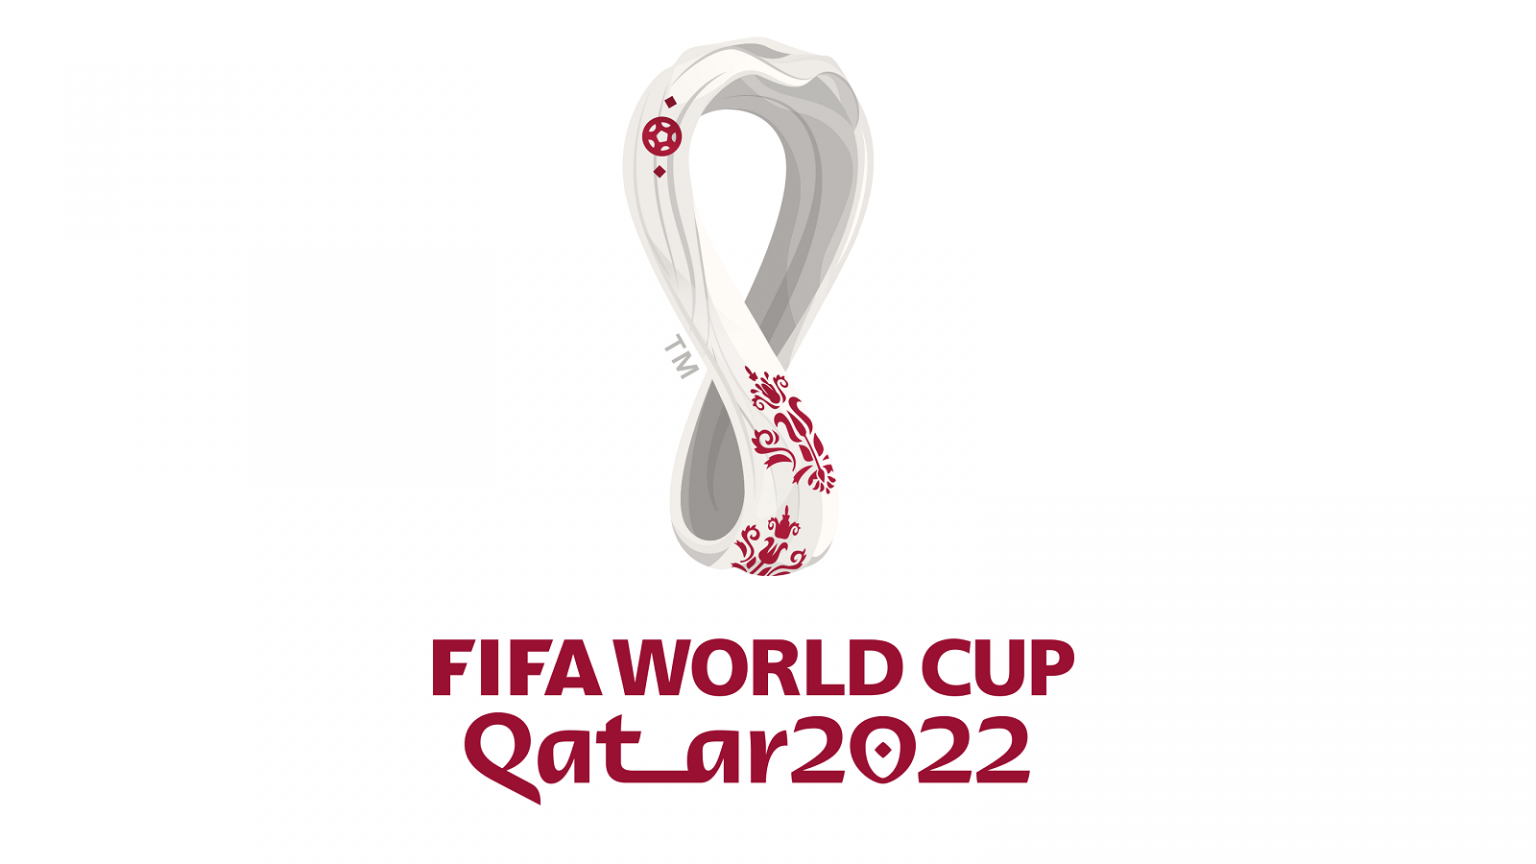 How to Watch FIFA World Cup 2022 Without Cable Live Stream Qatar